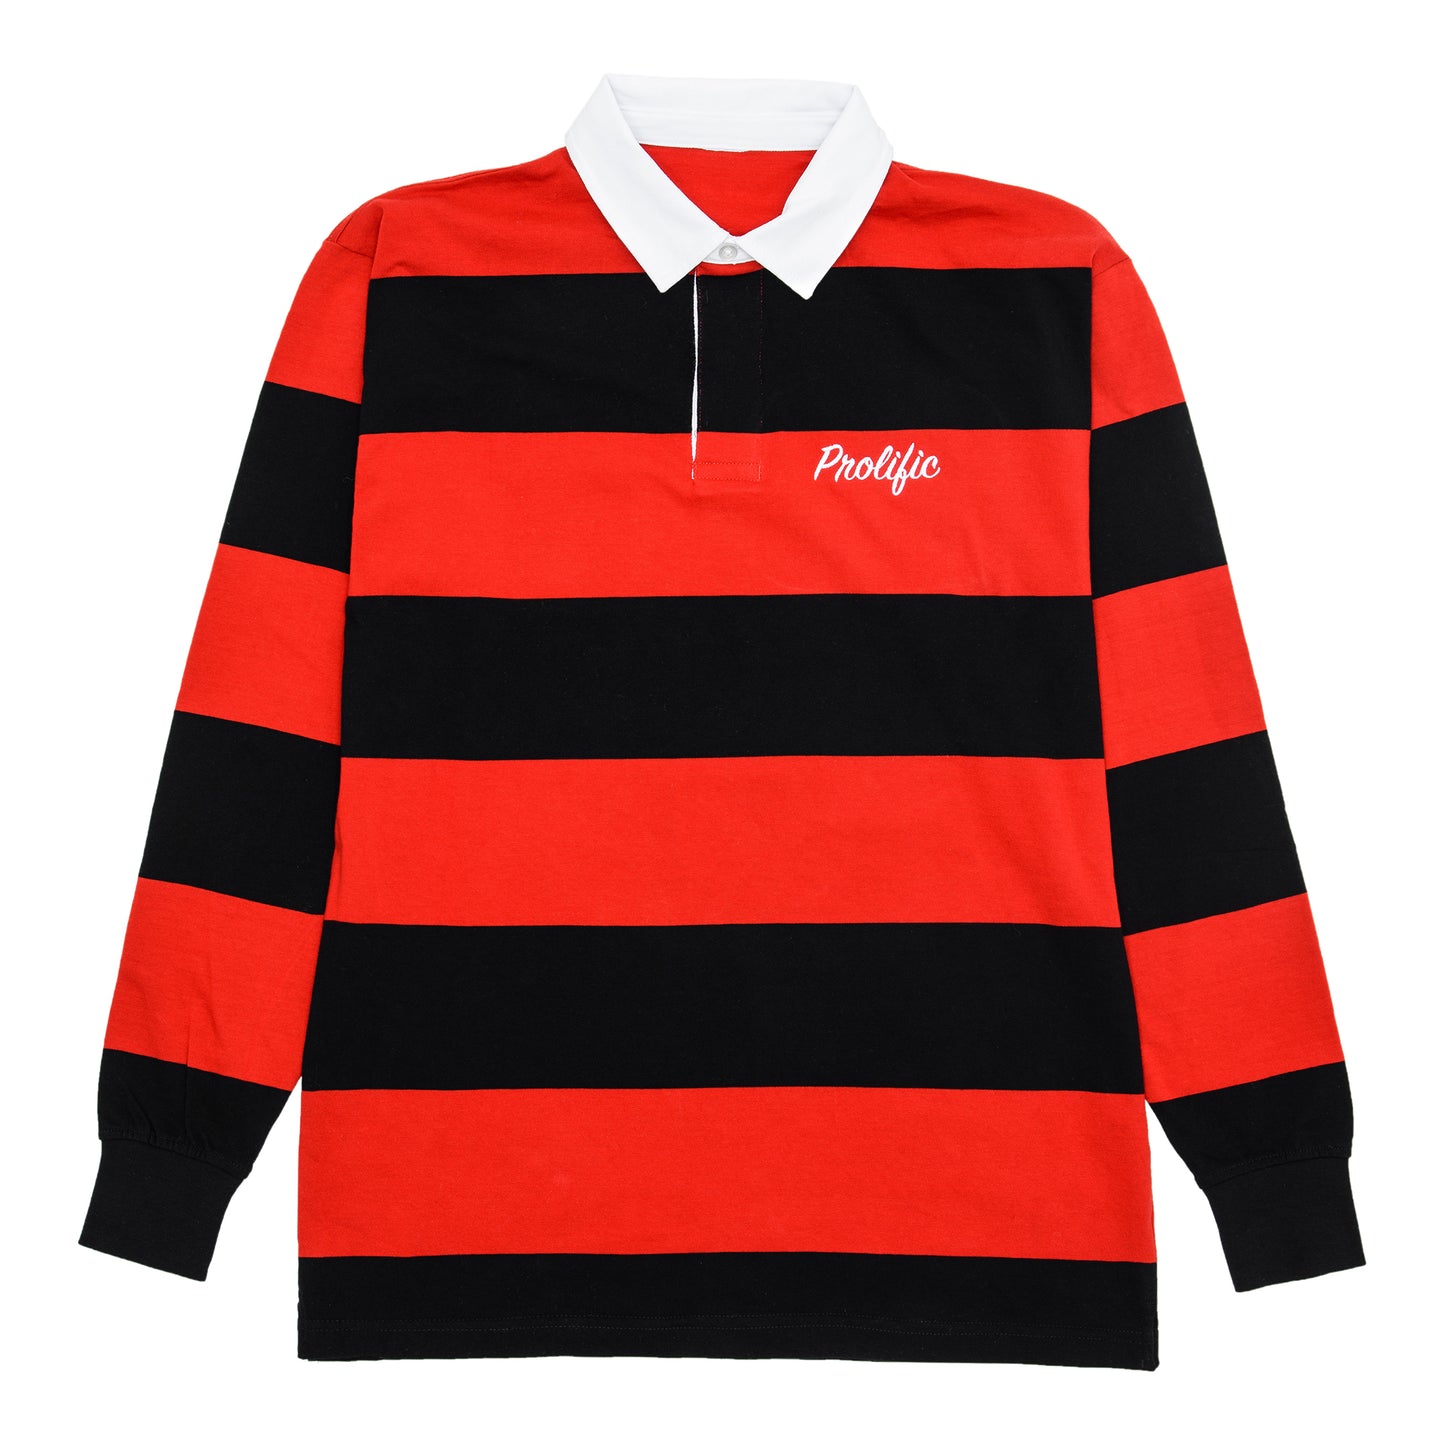 Prolific Rugby Jersey - Black/Red